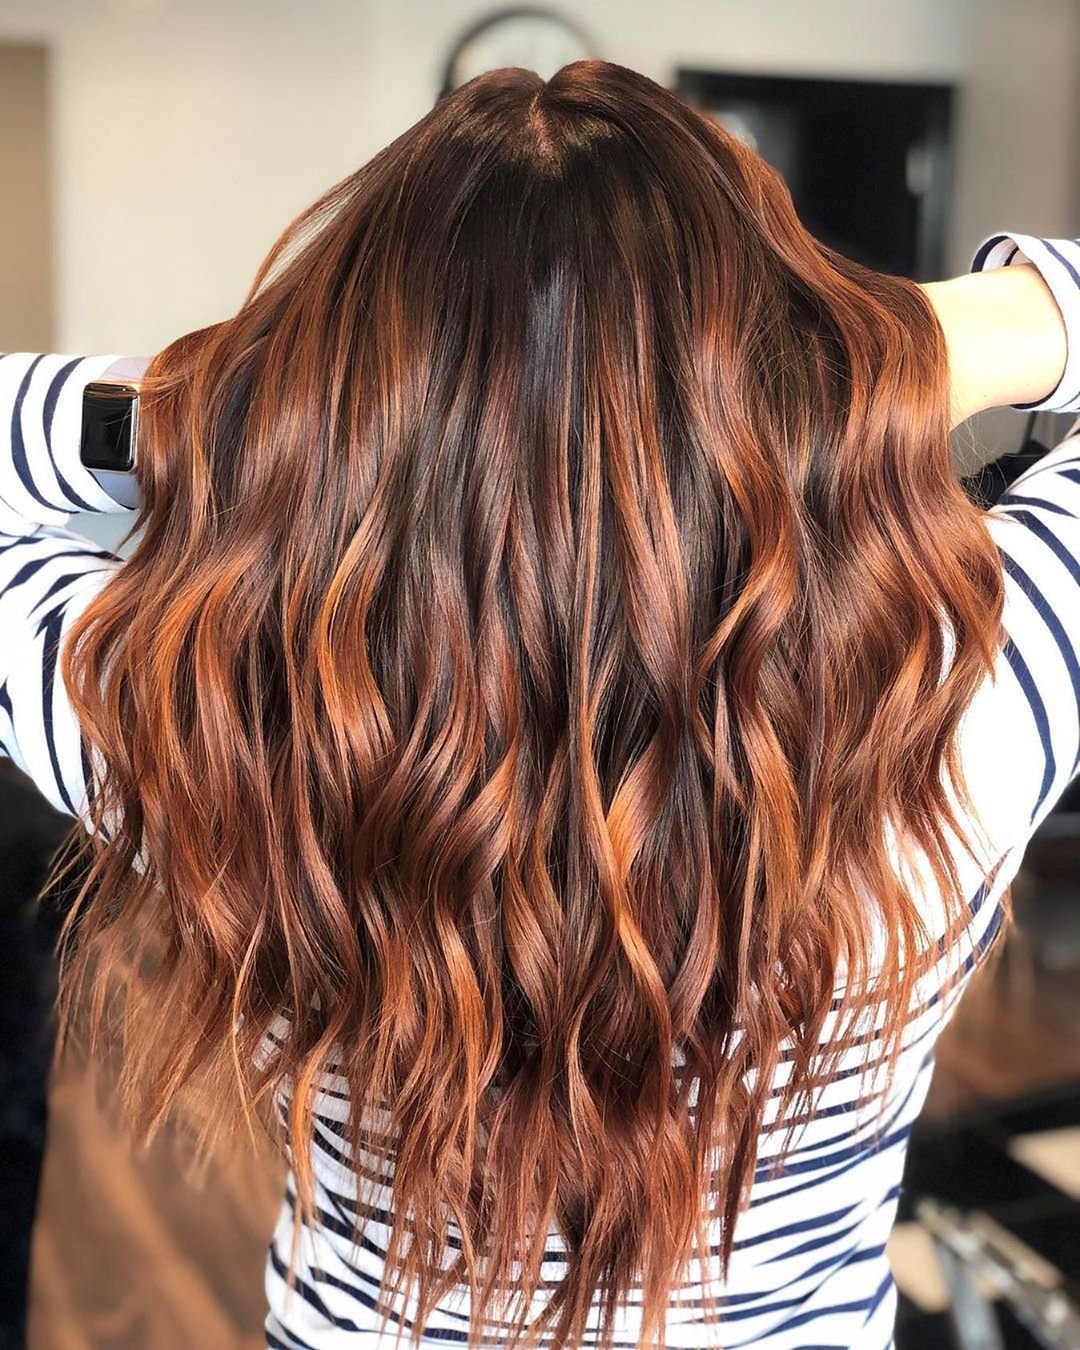 Monet hoe vaak had het niet door Wella USA on Twitter: "Pumpkin Spice Latte anyone? 🎃☕️ Check out  Instagram's #Leequiinn's formula! ⬇️ #WellaHair Roots: Color Touch 6/0 + 6/4  Lowlight: Color Touch 7/4 Freehand panels: Blondor and #WELLAPLEX Tone: